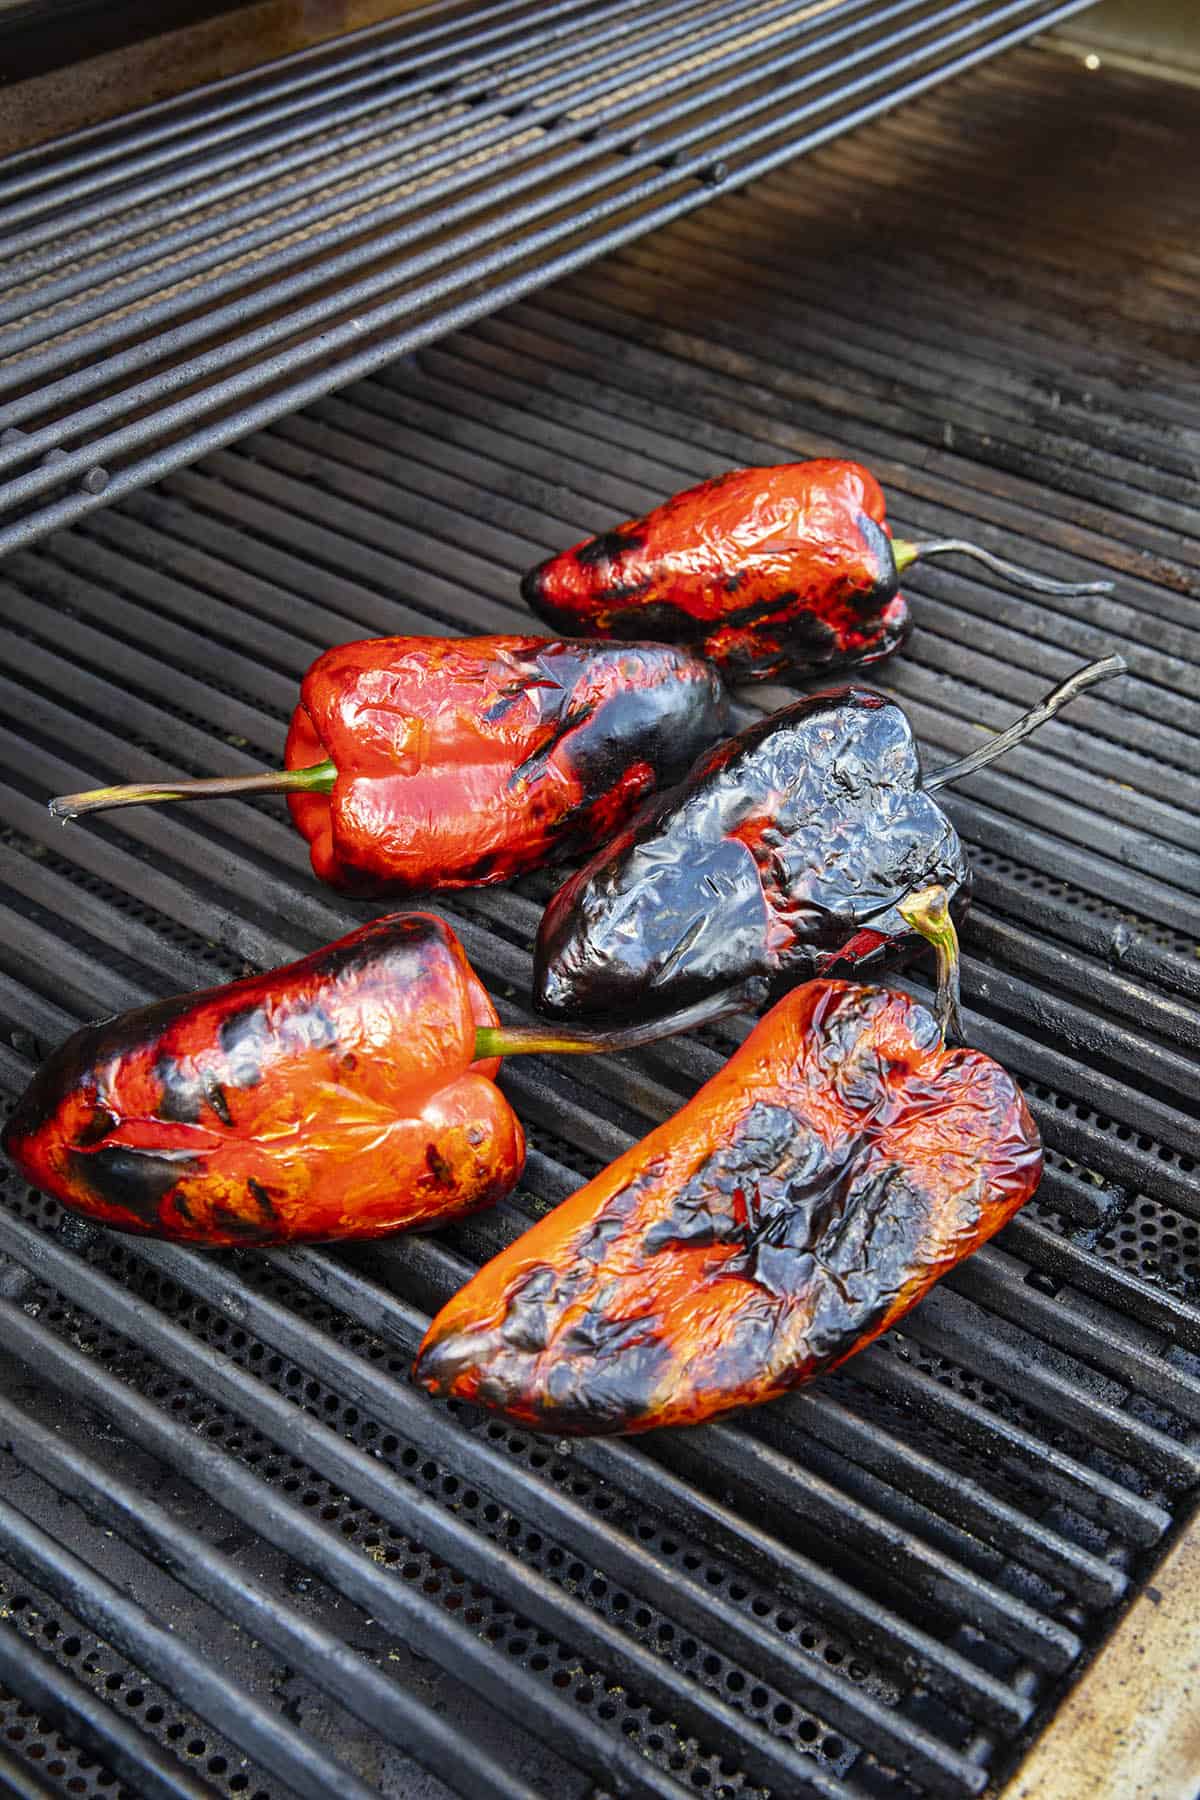 Roasting red peppers on the grill